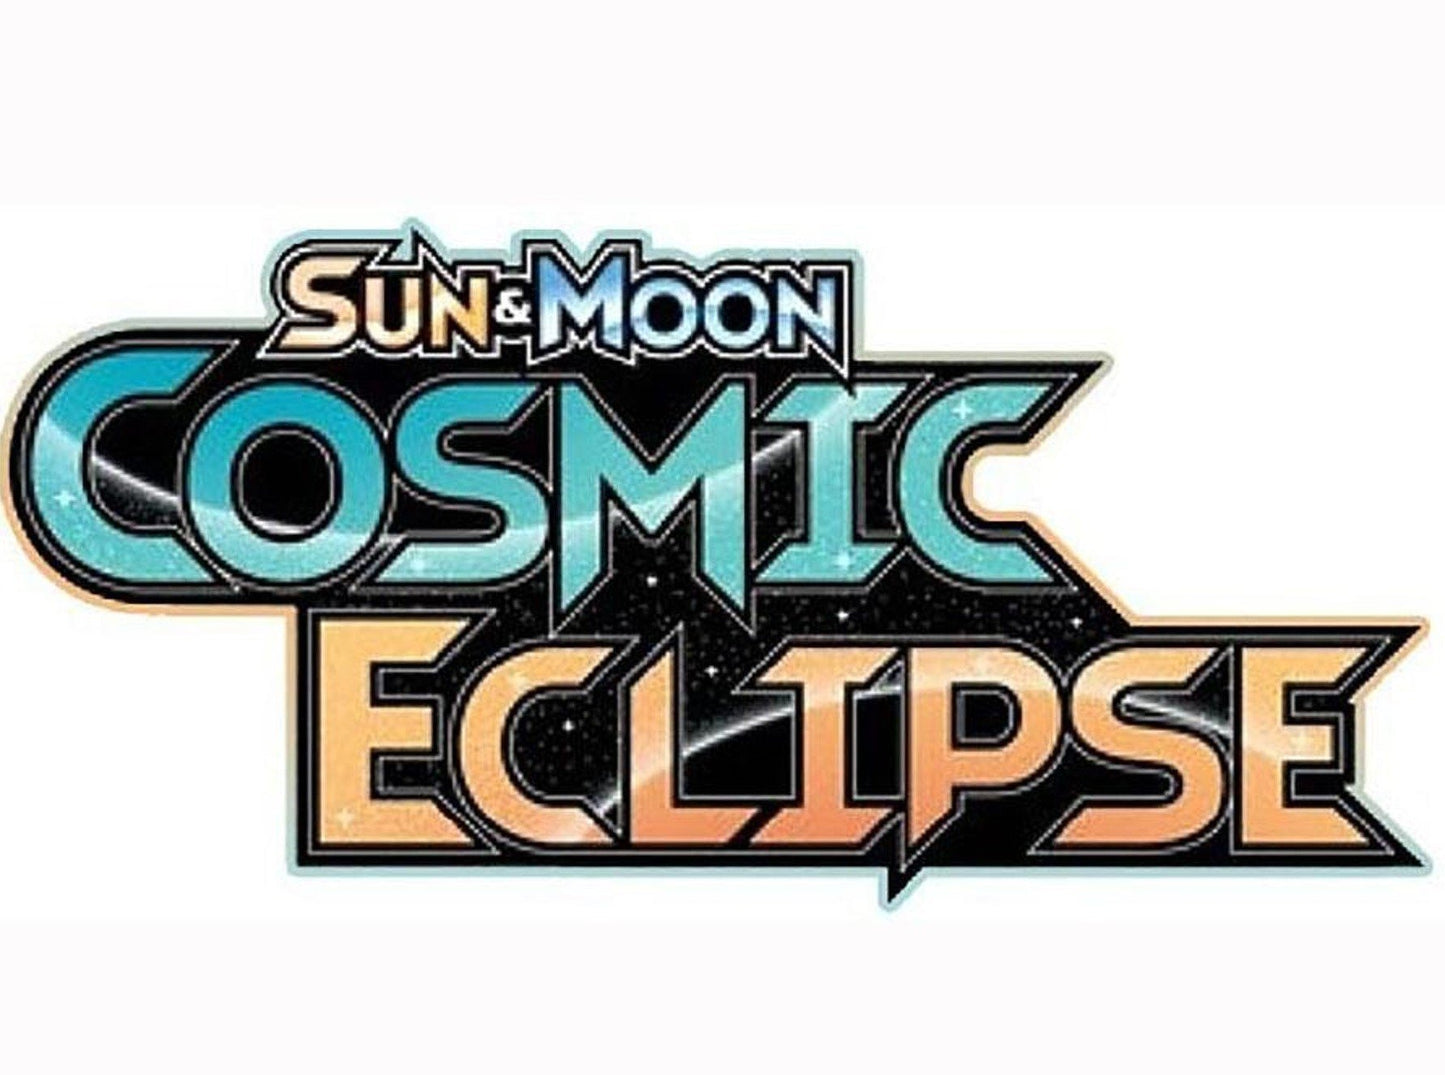 SM Cosmic Eclipse 196/236 Lillie's Full Force